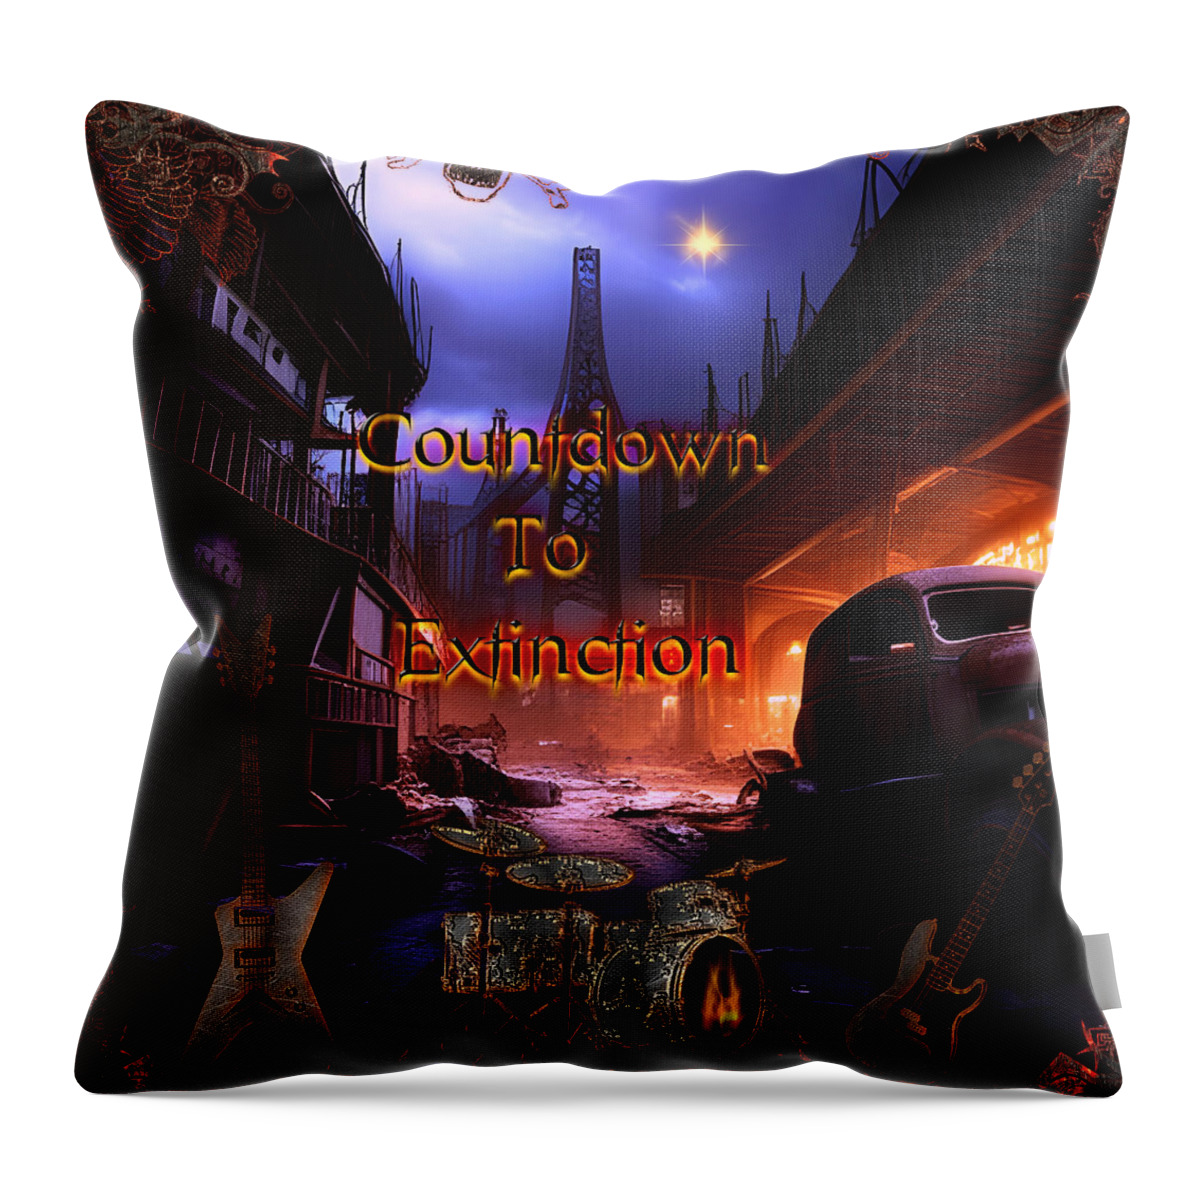 Hard Rock Music Throw Pillow featuring the digital art Countdown To Extinction by Michael Damiani